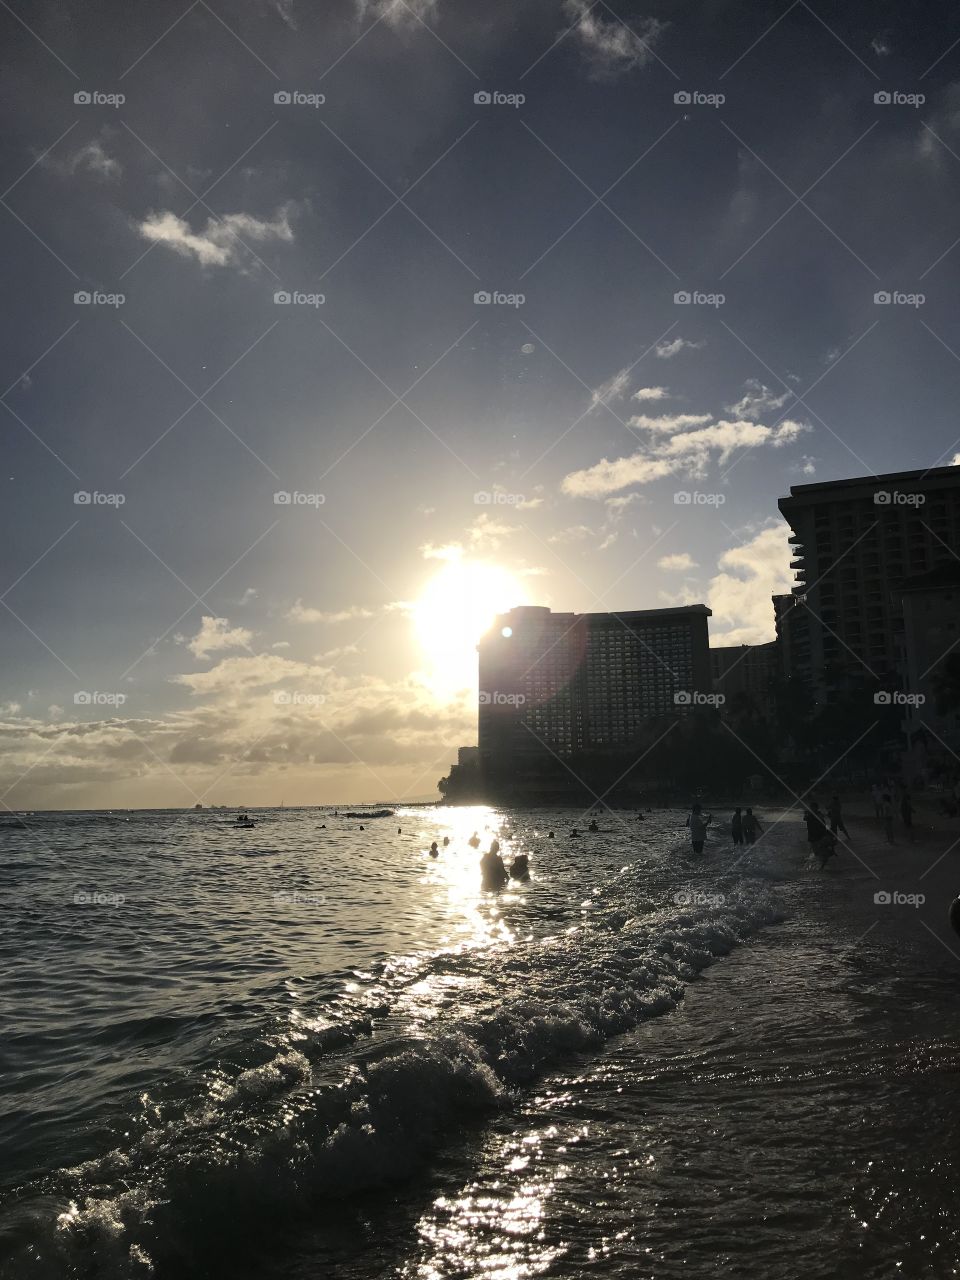 Sunset over the Pacific Ocean, Waikiki Beach, Oahu. The last golden light of a 9 week trip around the USA. It truly was a spectacle to behold. 